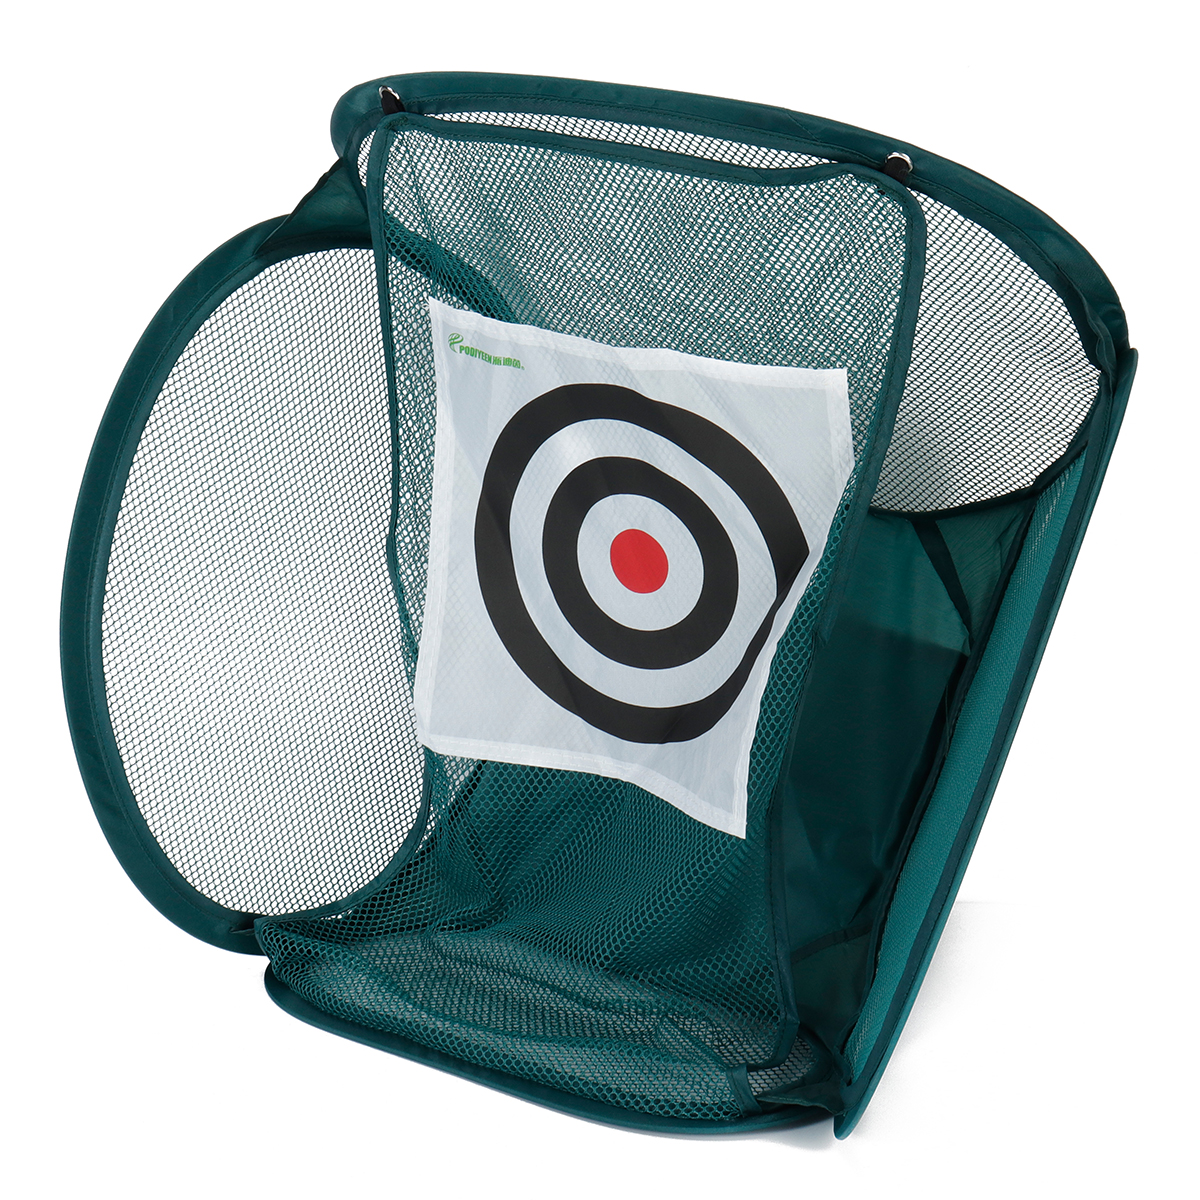 Foldable-Golf-Trainning-Net-Practice-Target-Net-With-Storage-Bag-Hitting-Cage-Indoor-Outdoor-Chippin-1656807-7